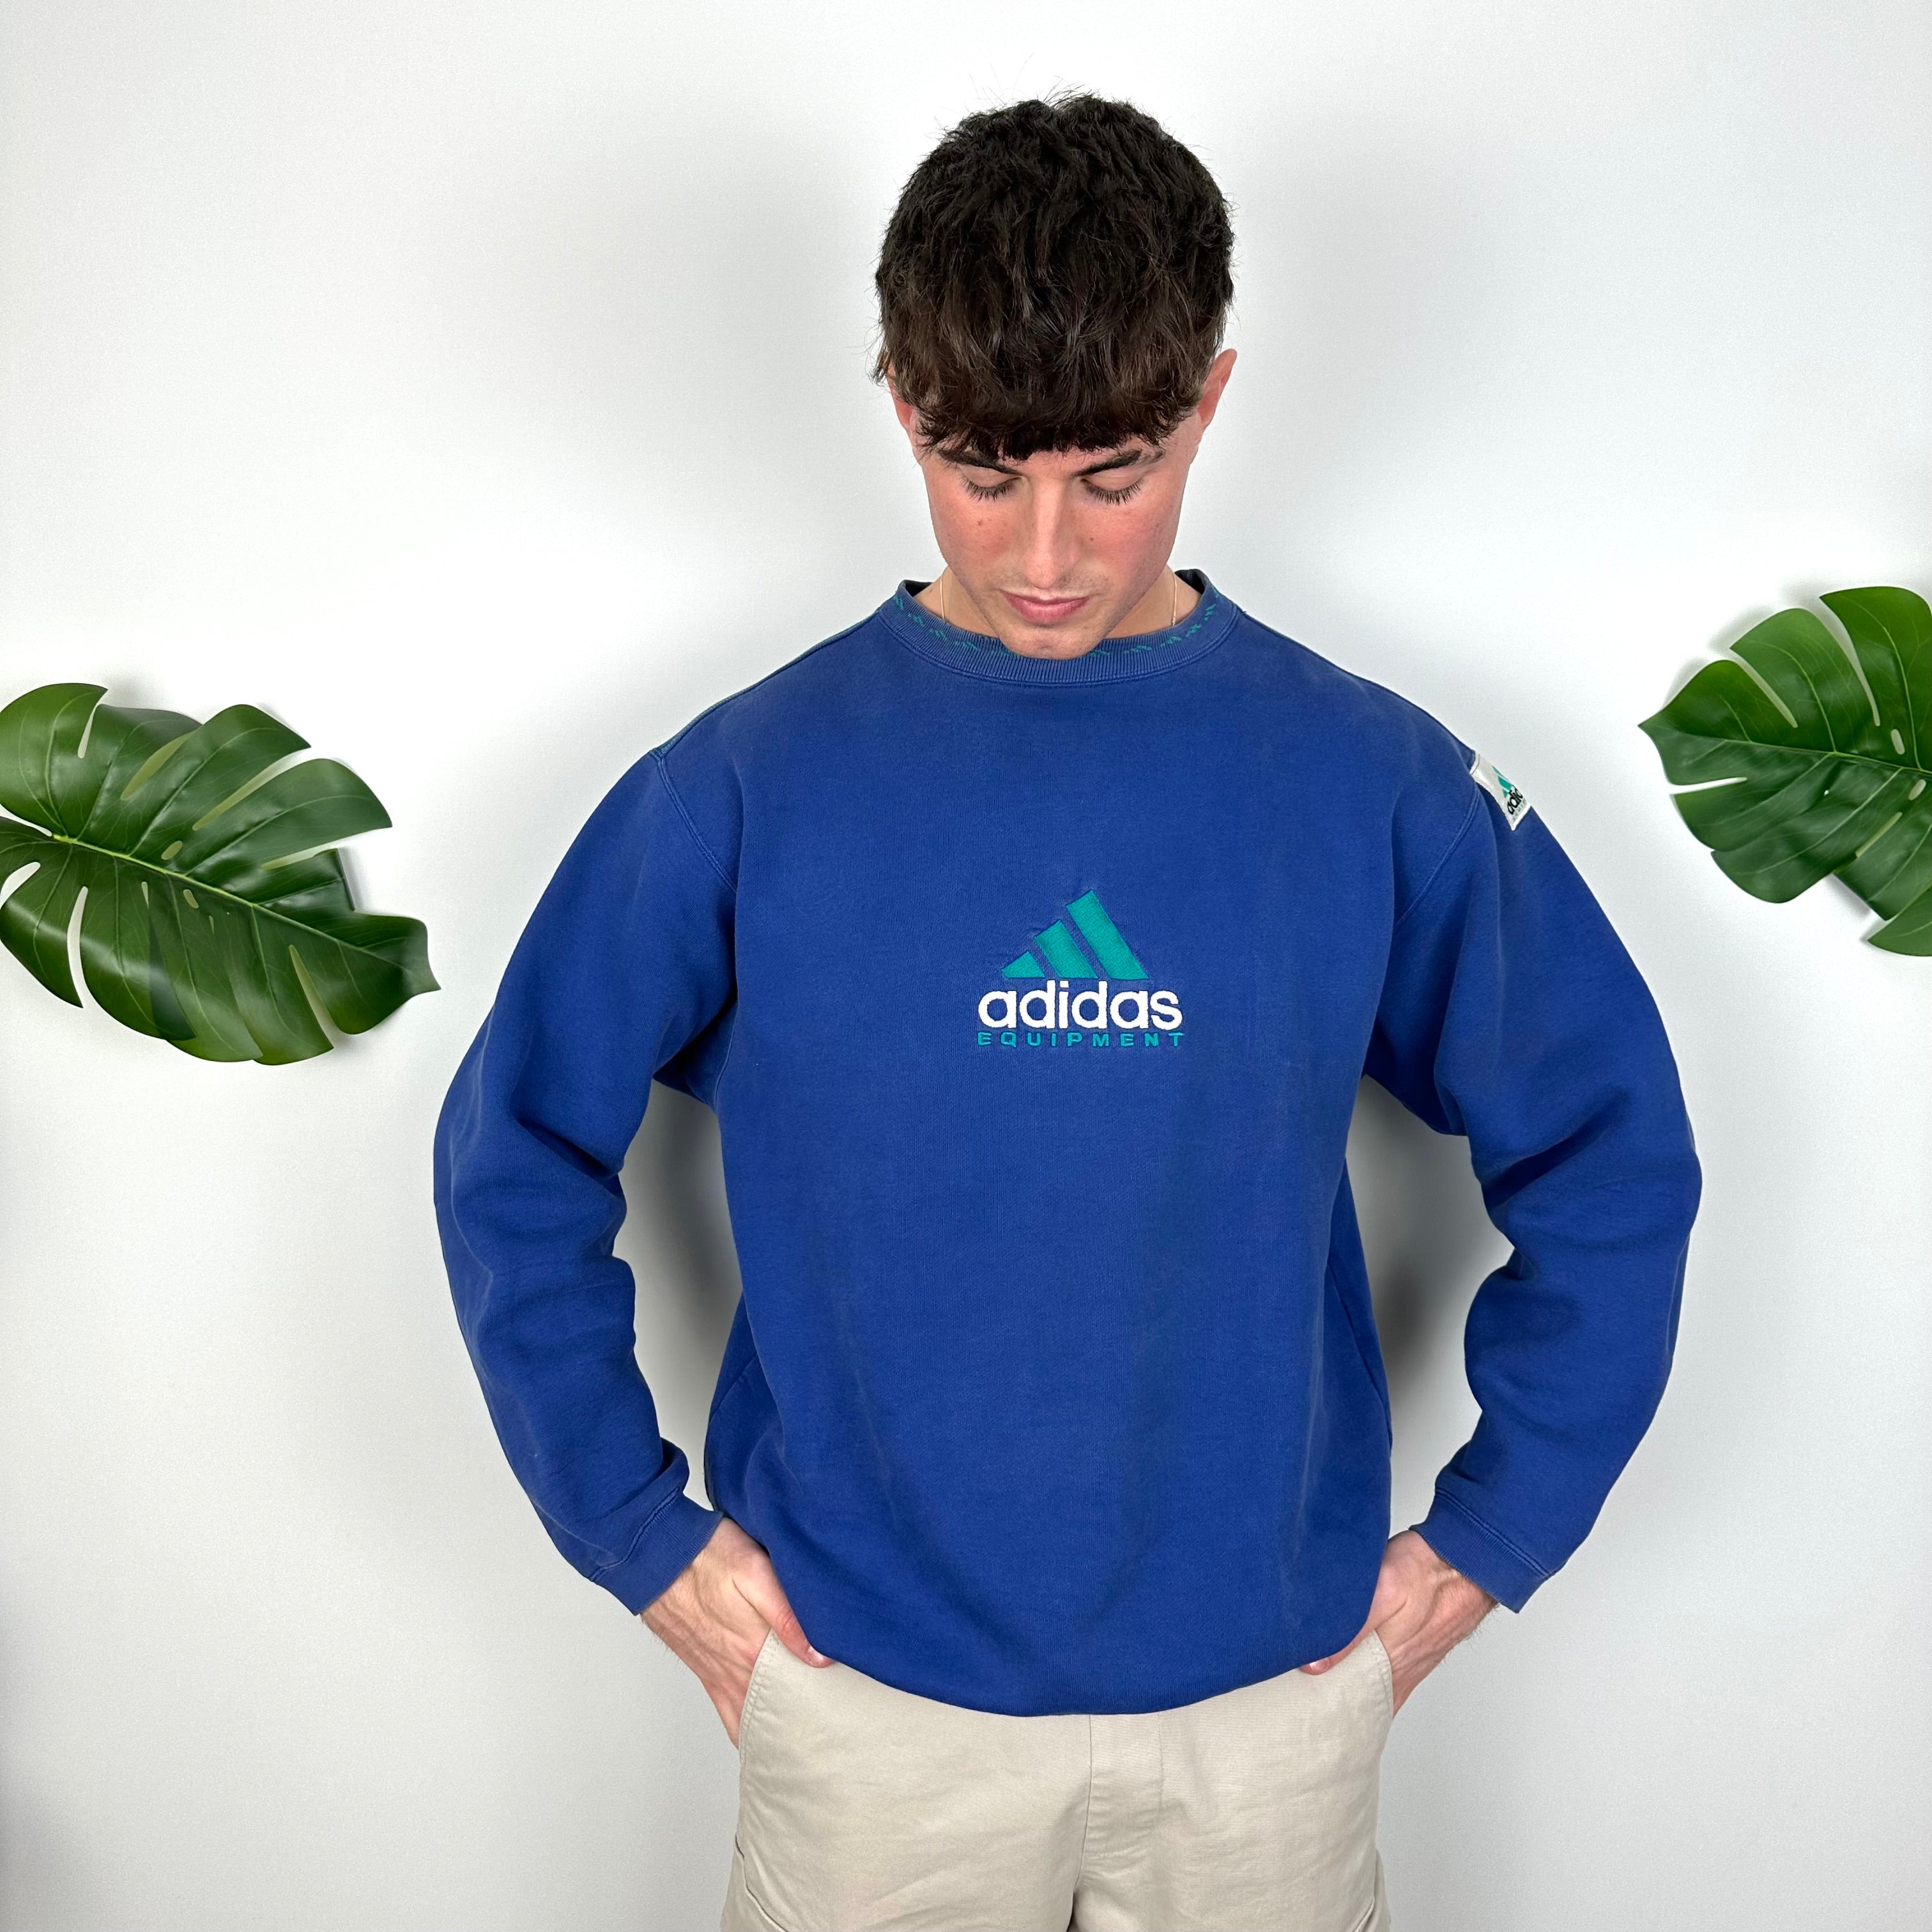 Adidas Equipment Blue Embroidered Spell Out Sweatshirt as worn by Anna Archer (M)